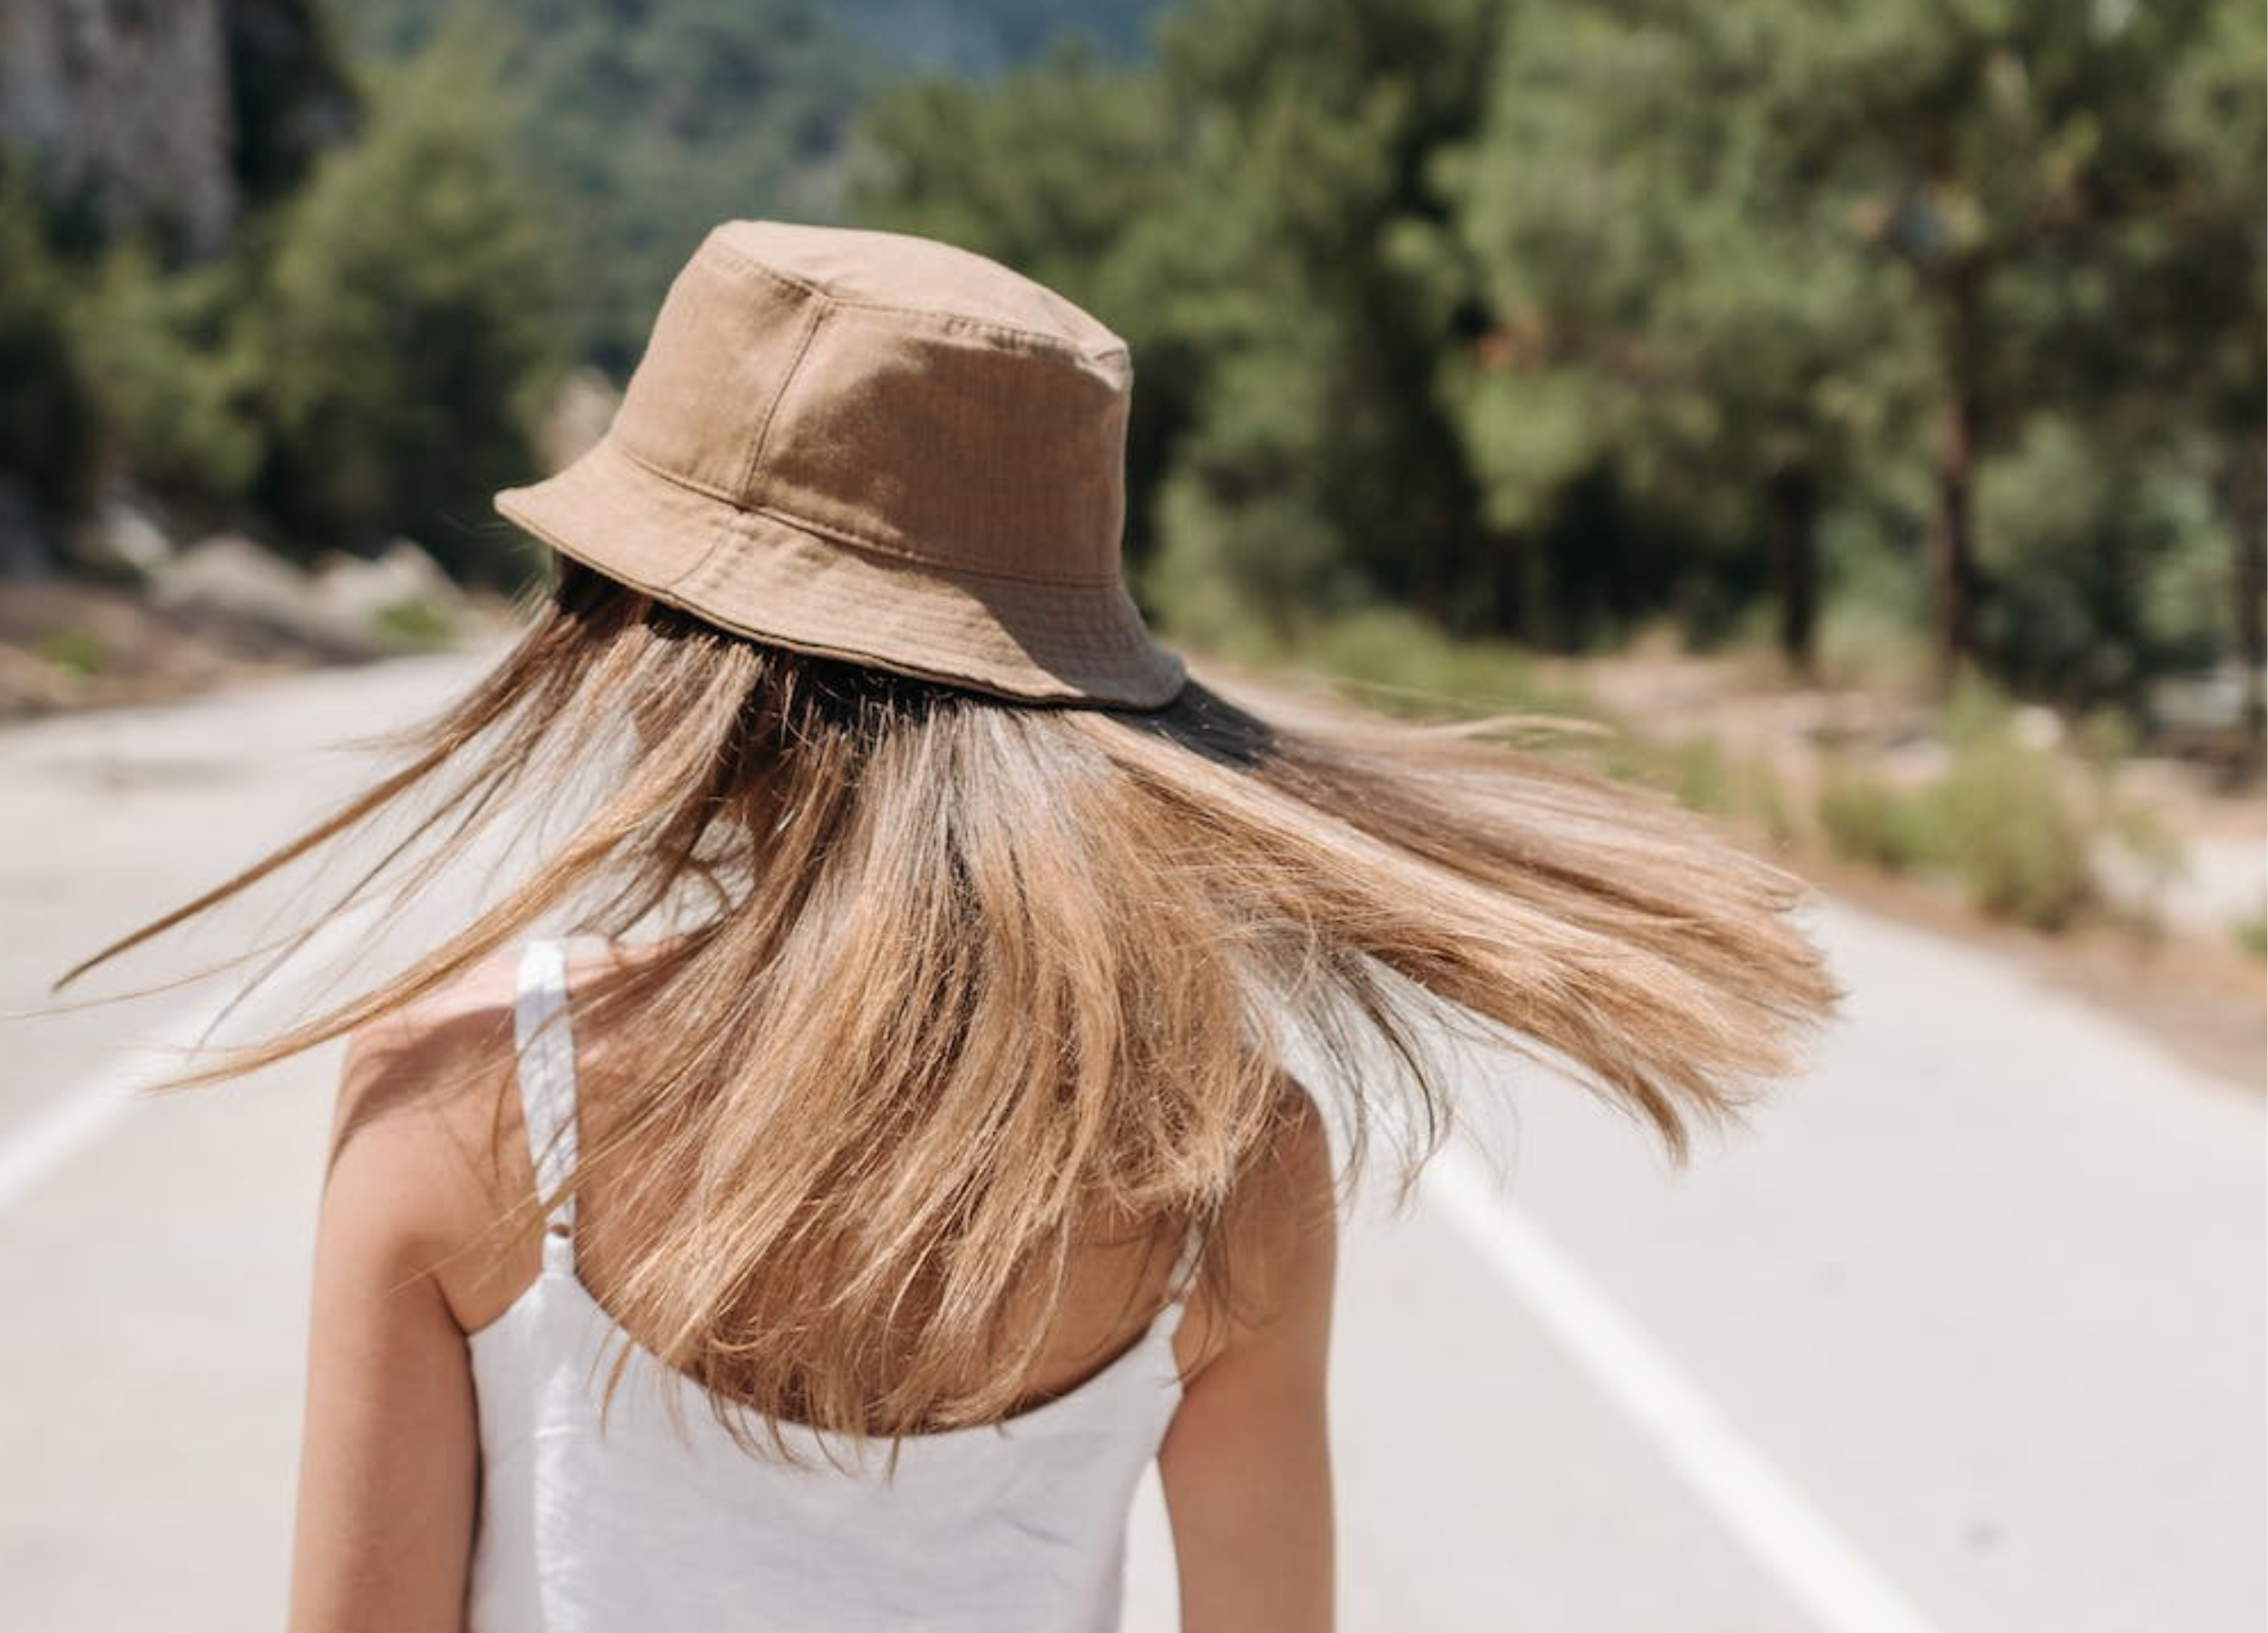 Bucket hat in sunshine with woman outside with long blonde hair